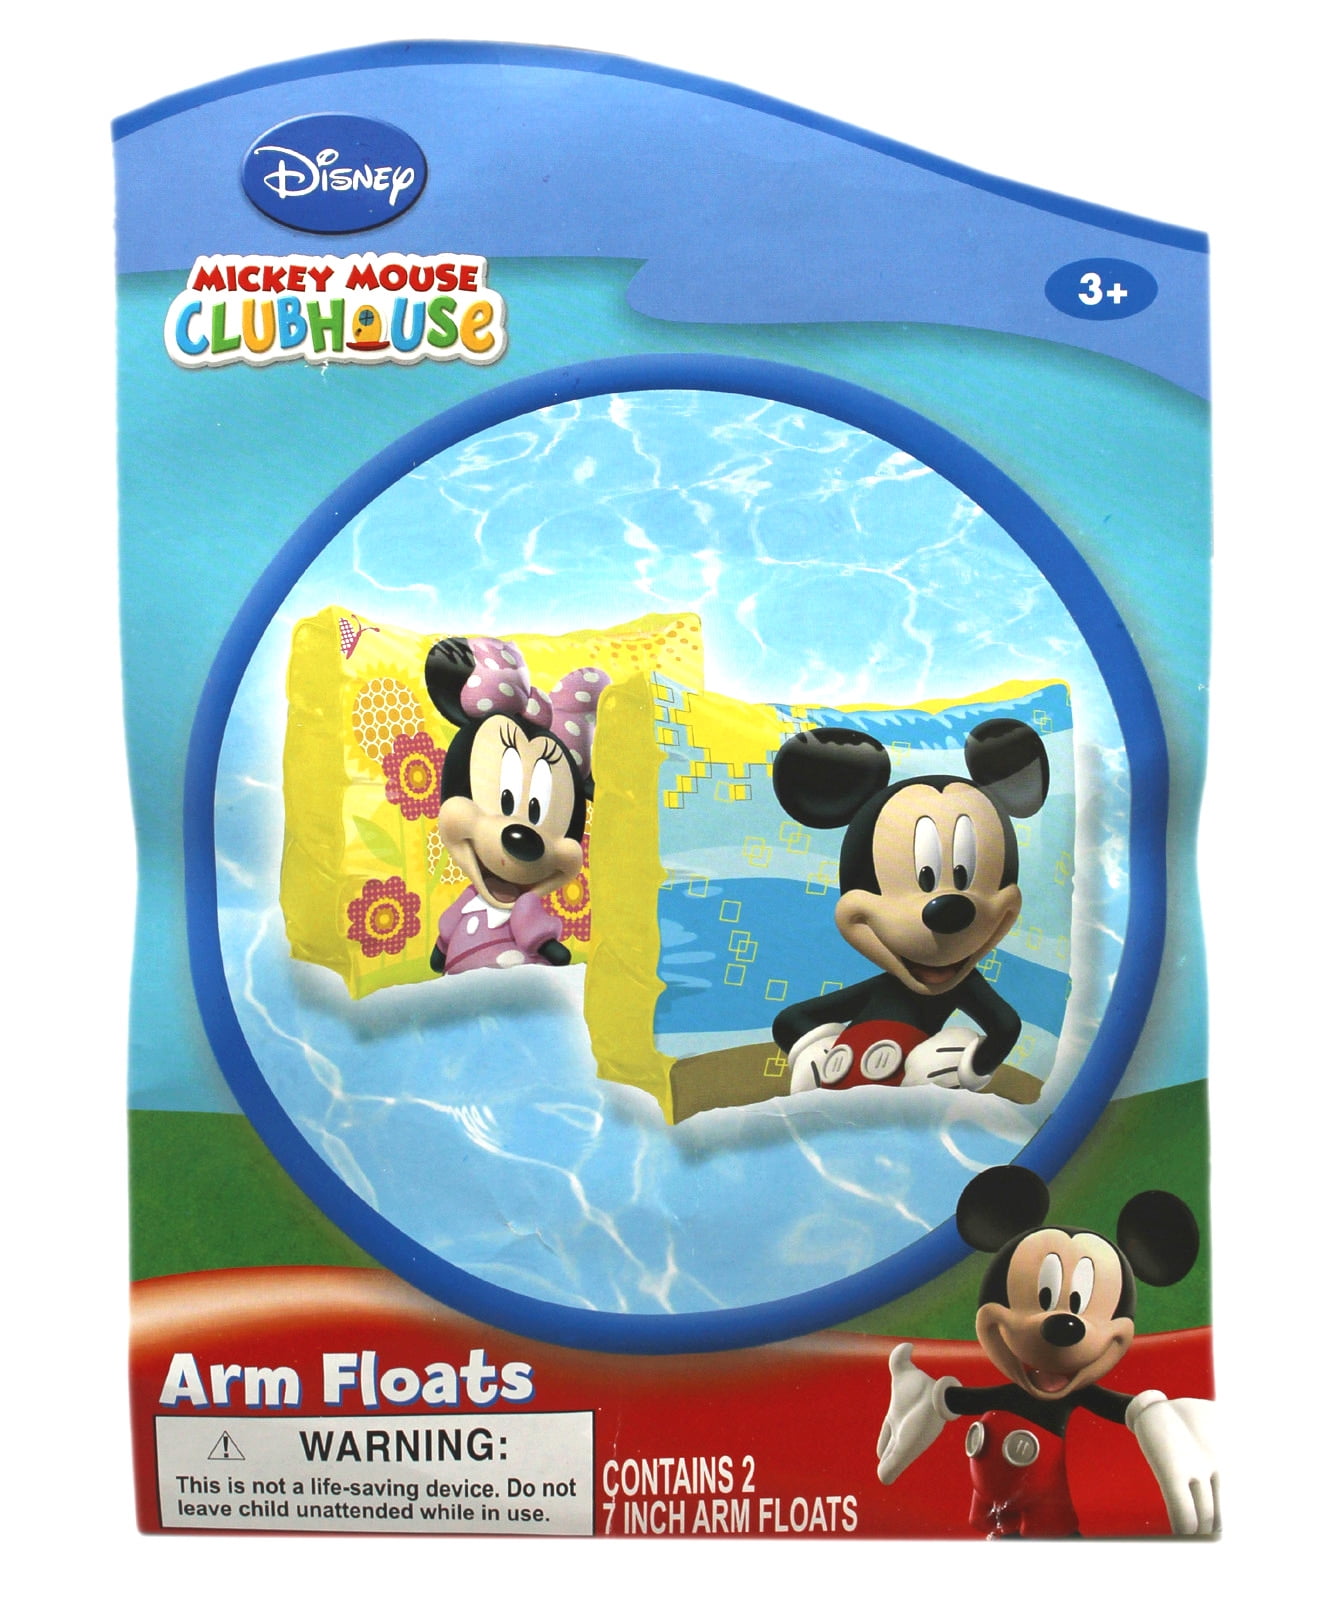 New in package Minnie Mouse Inflatable ARM FLOATS 